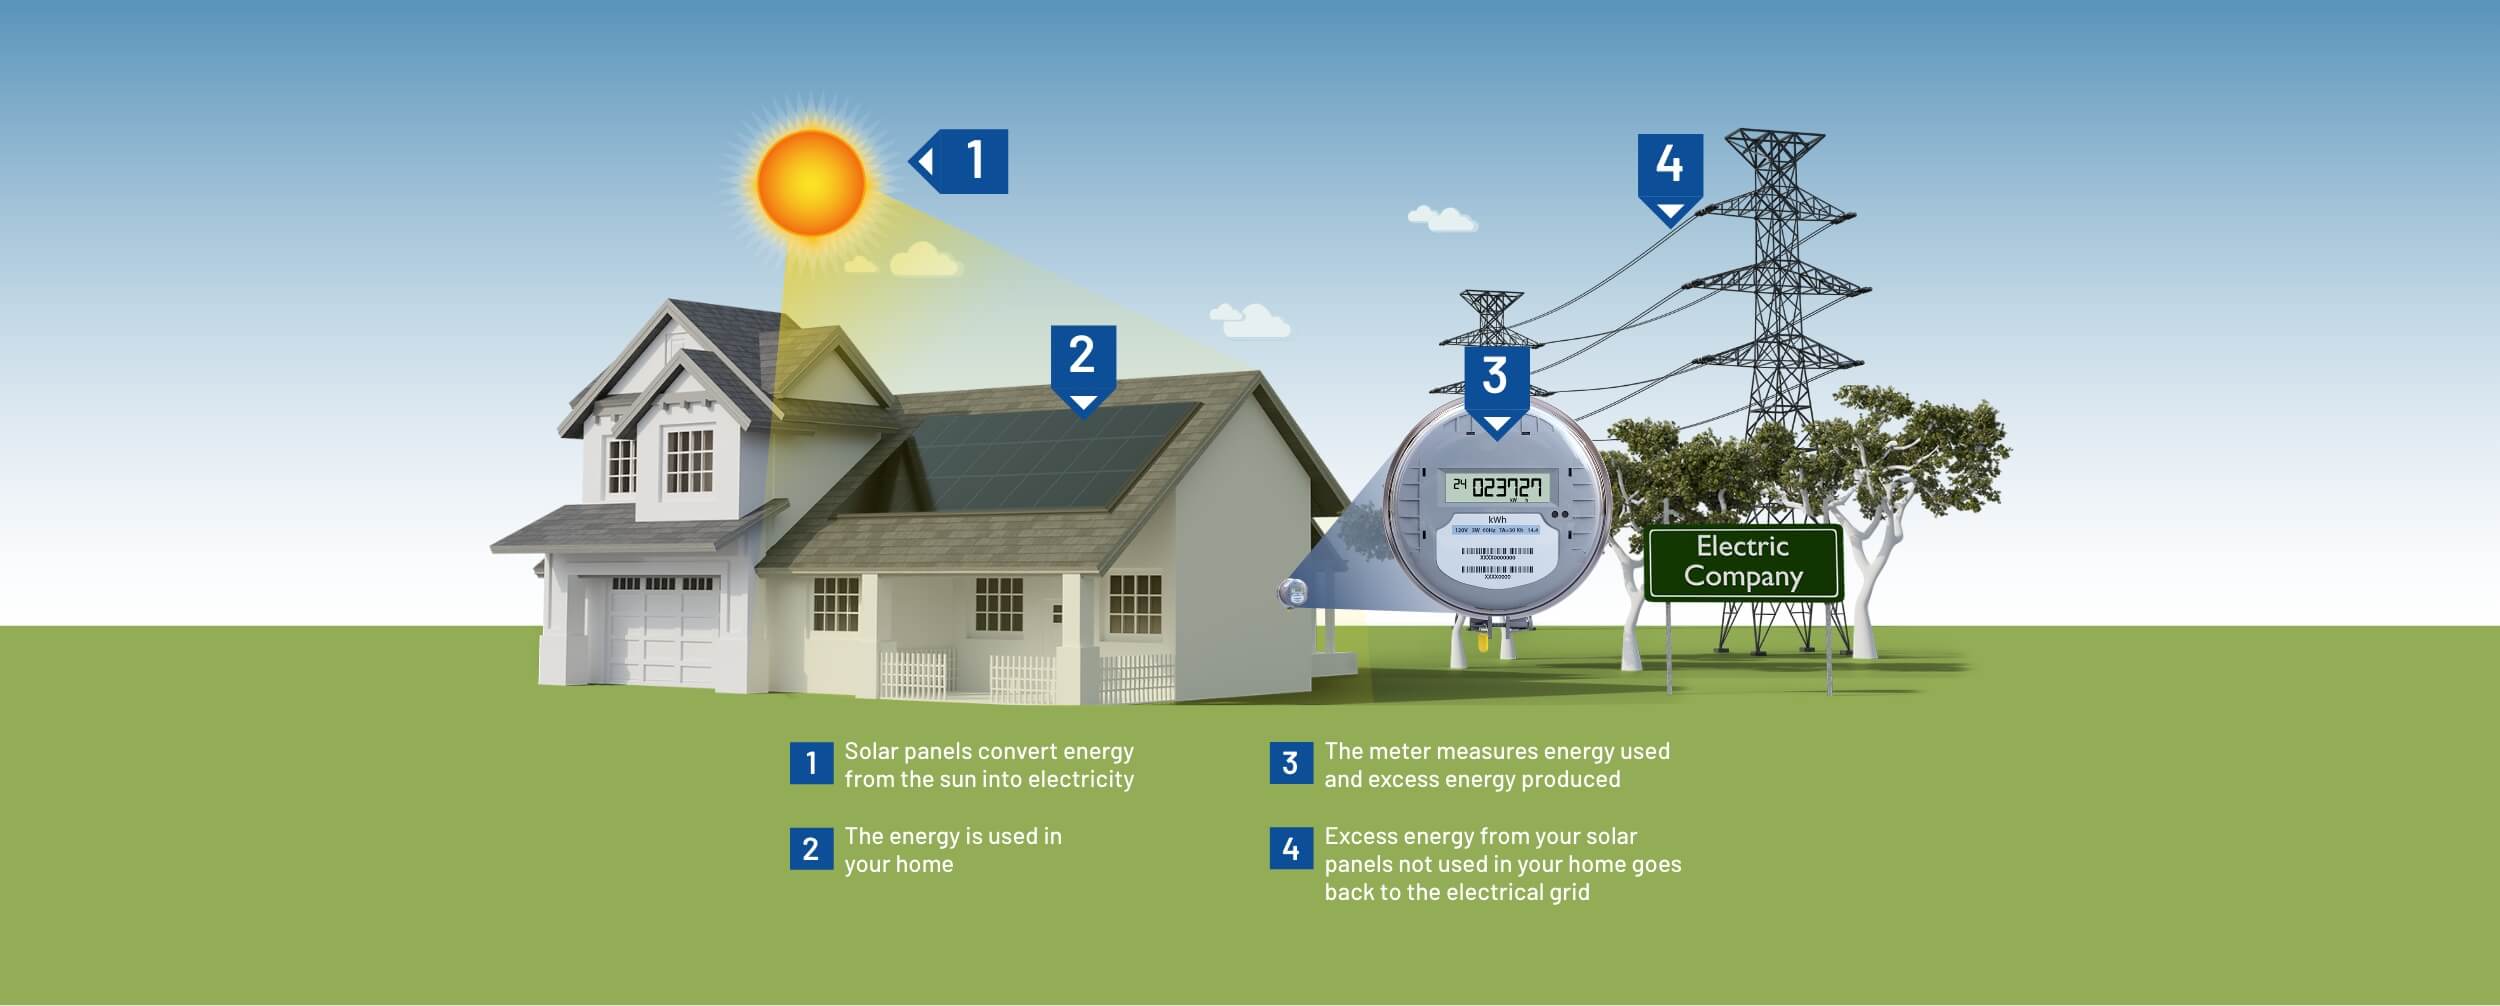 Solar infographic; first Solar works by solar panels convert energy from the sun into electricity second the energy is used in the your home third the meter measures energy and excess energy produced and fourth excess energy from your solar panels not used in your home goes back to the electrical grid.